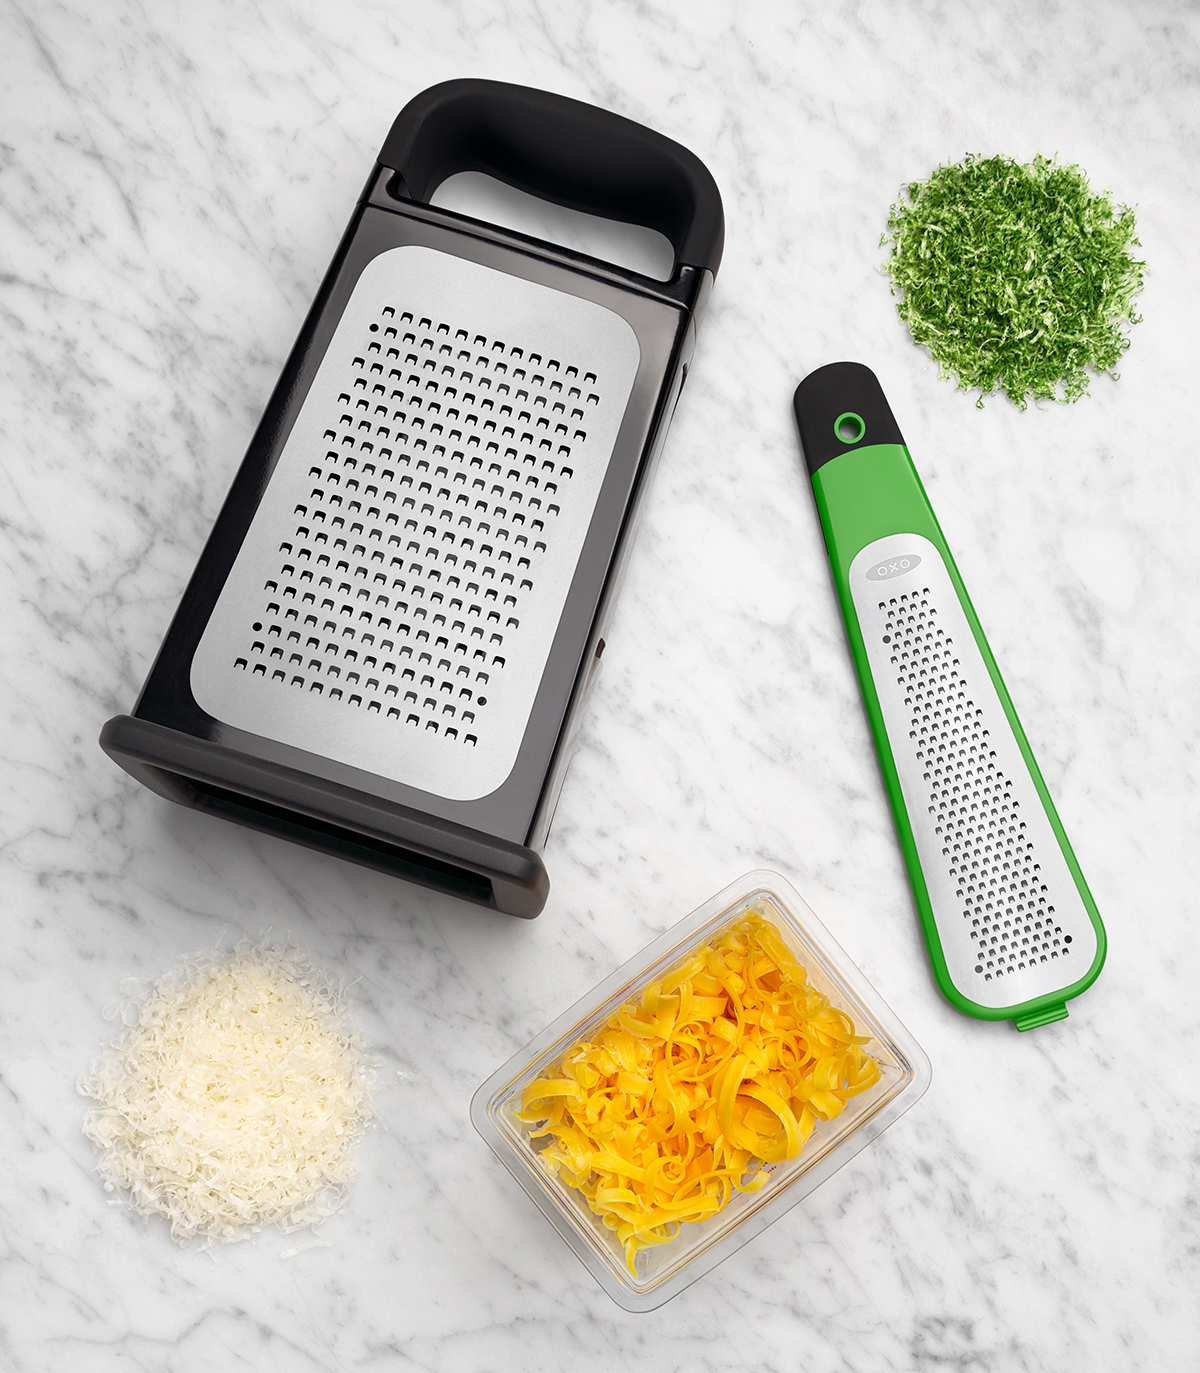 https://www.containerstore.com/catalogimages/425004/10086166-OXO-Box-Grater-VEN12.jpg